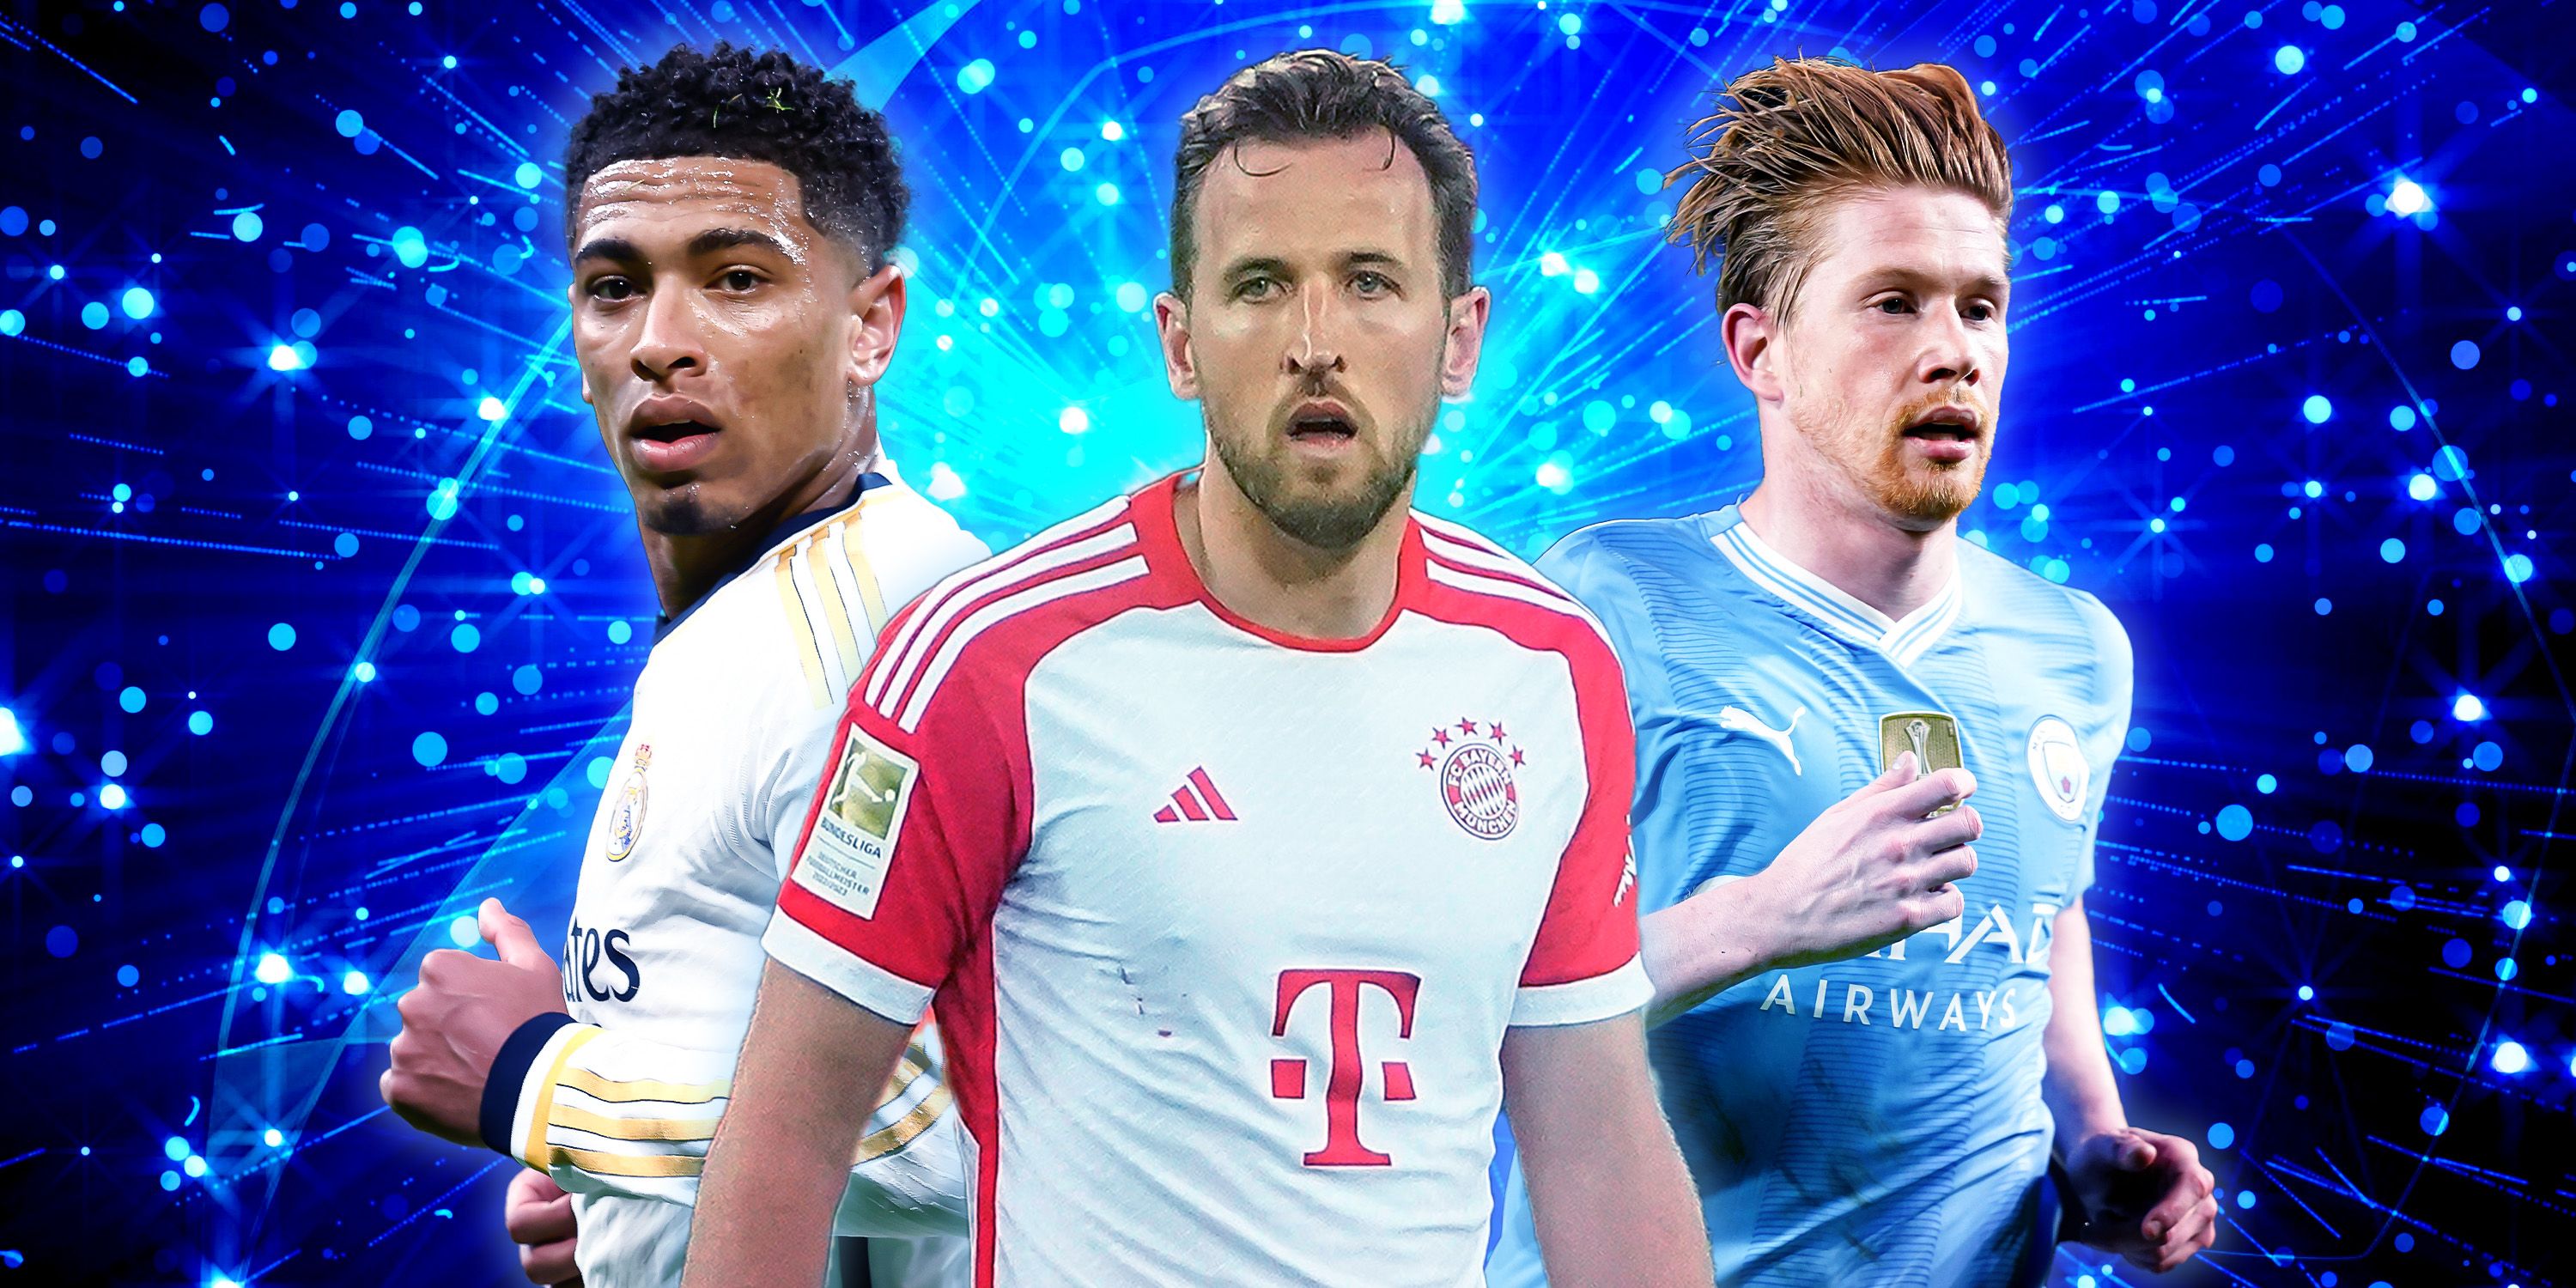 Real Madrid's Jude Bellingham, Bayern Munich's Harry Kane, and Man City's Kevin De Bruyne.